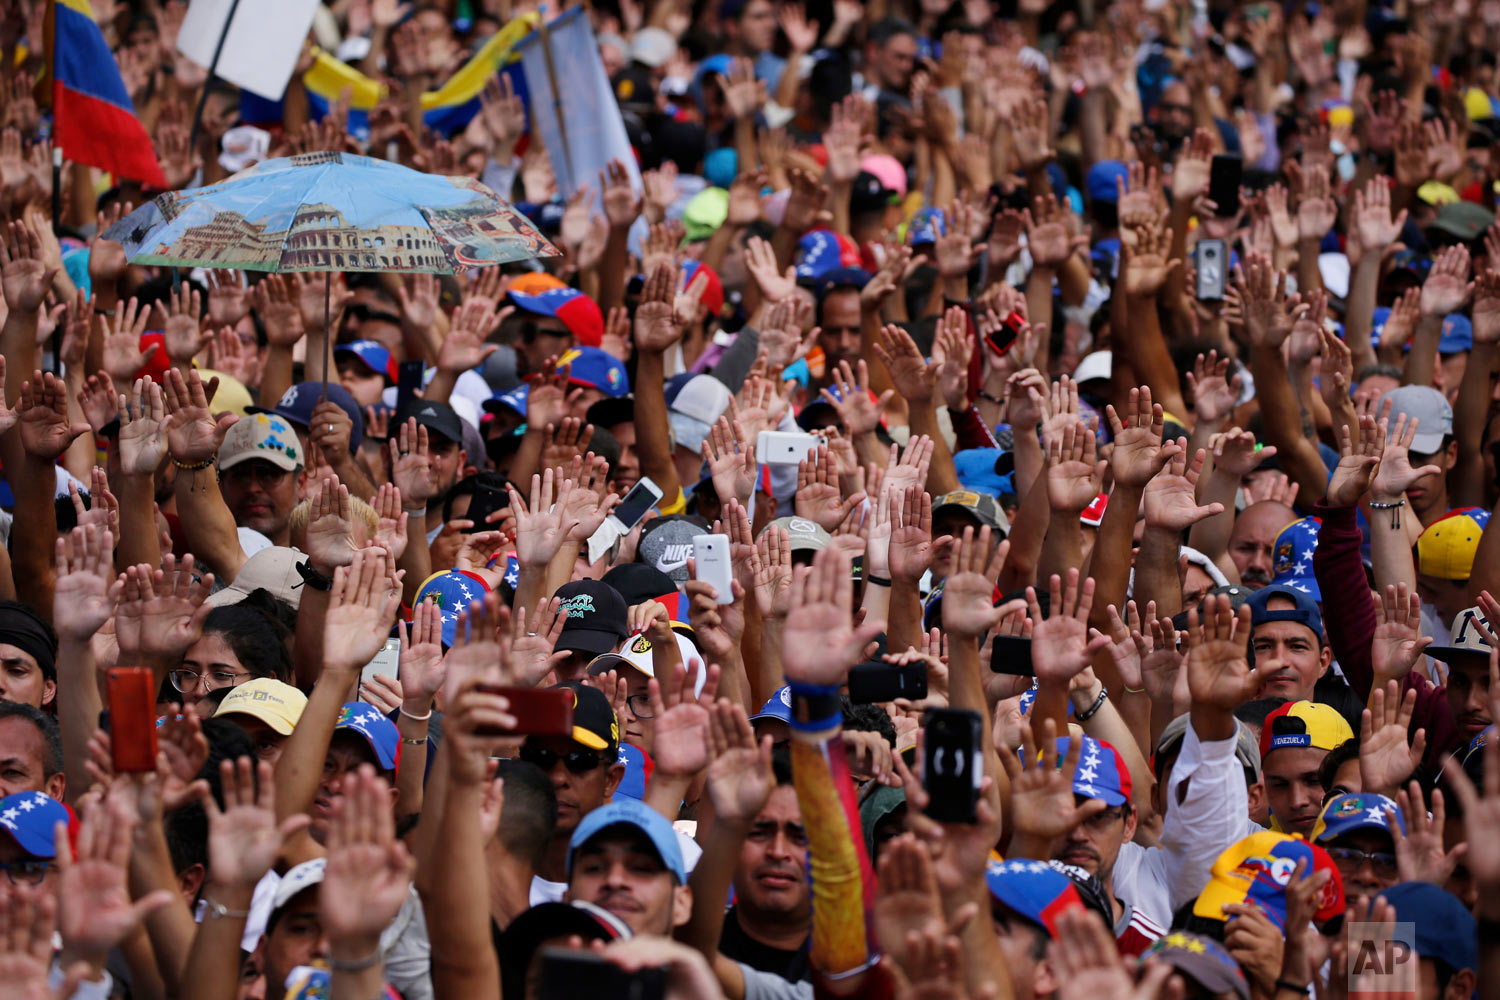  Anti-government protesters hold their hands up during the symbolic swearing-in of Juan Guaido, head of the opposition-run congress, who declared himself interim president of Venezuela, during a rally demanding President Nicolas Maduro's resignation 